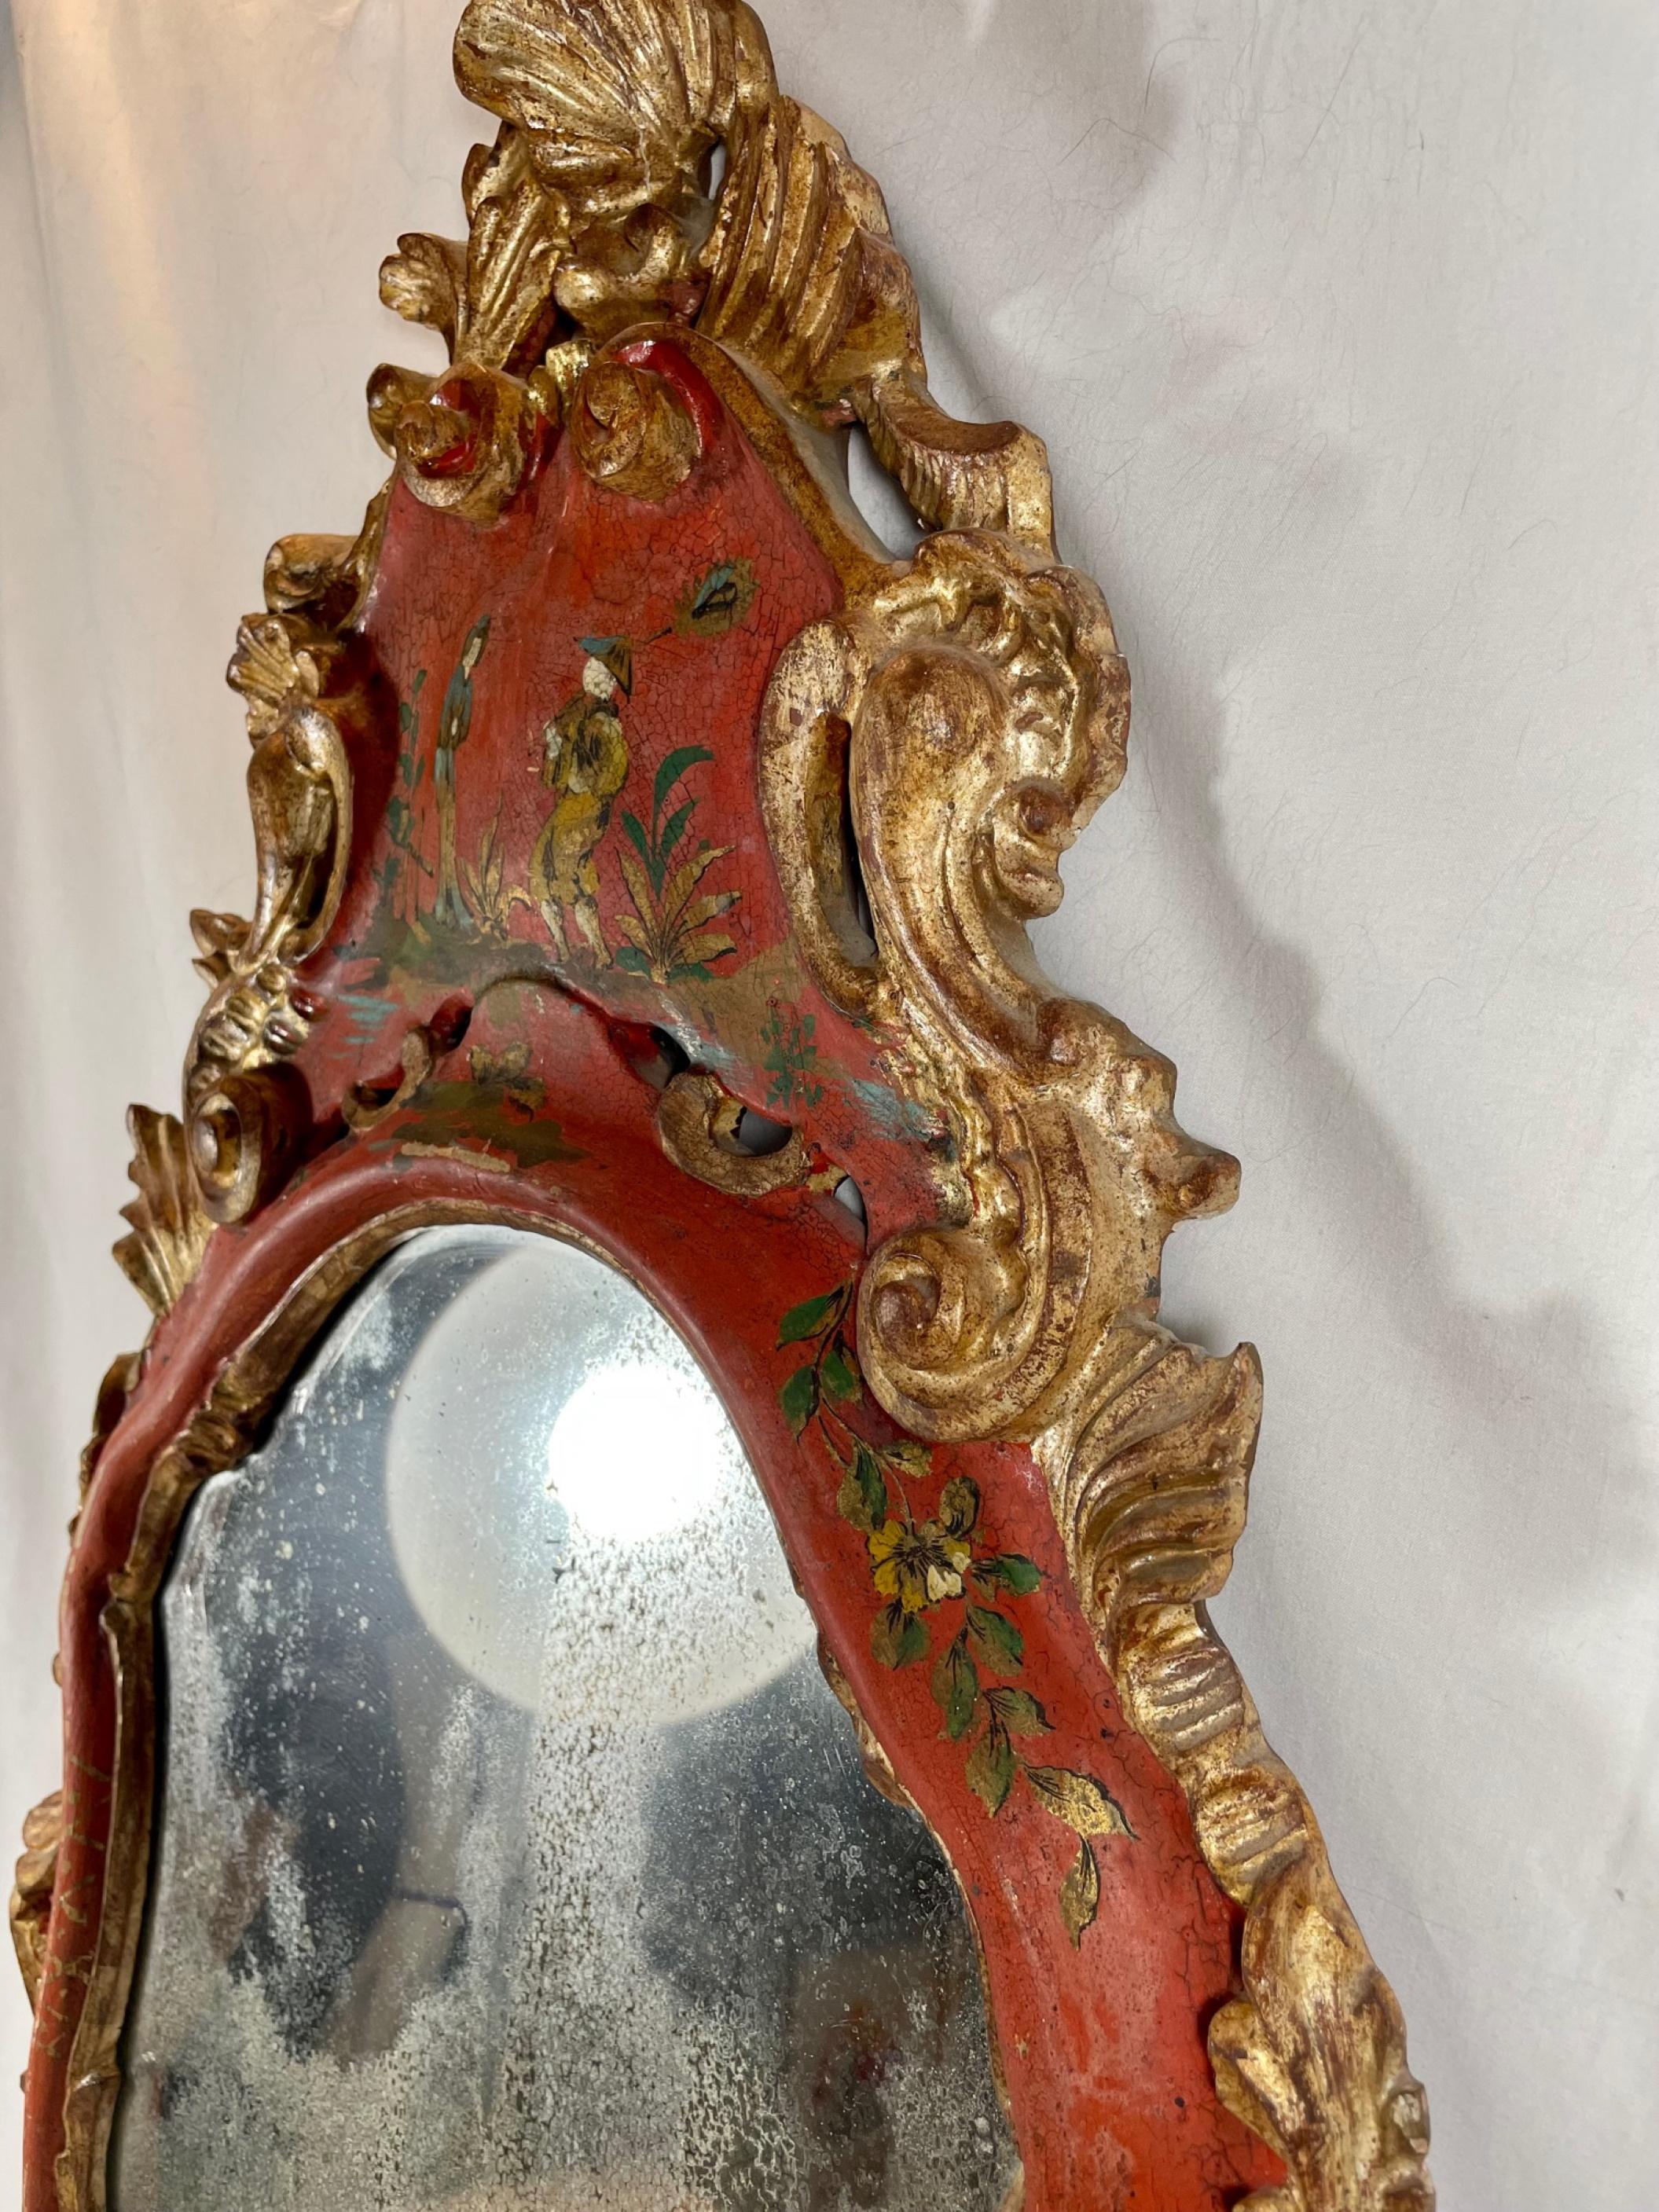 18th century Venetian Rococo polychrome and gilt decorated mirror.

The arched original mirror plate within a red lacquered scrolled and arched frame is decorated at the crest with a courting Chinese couple. Gilded ribbons Meander pleasingly